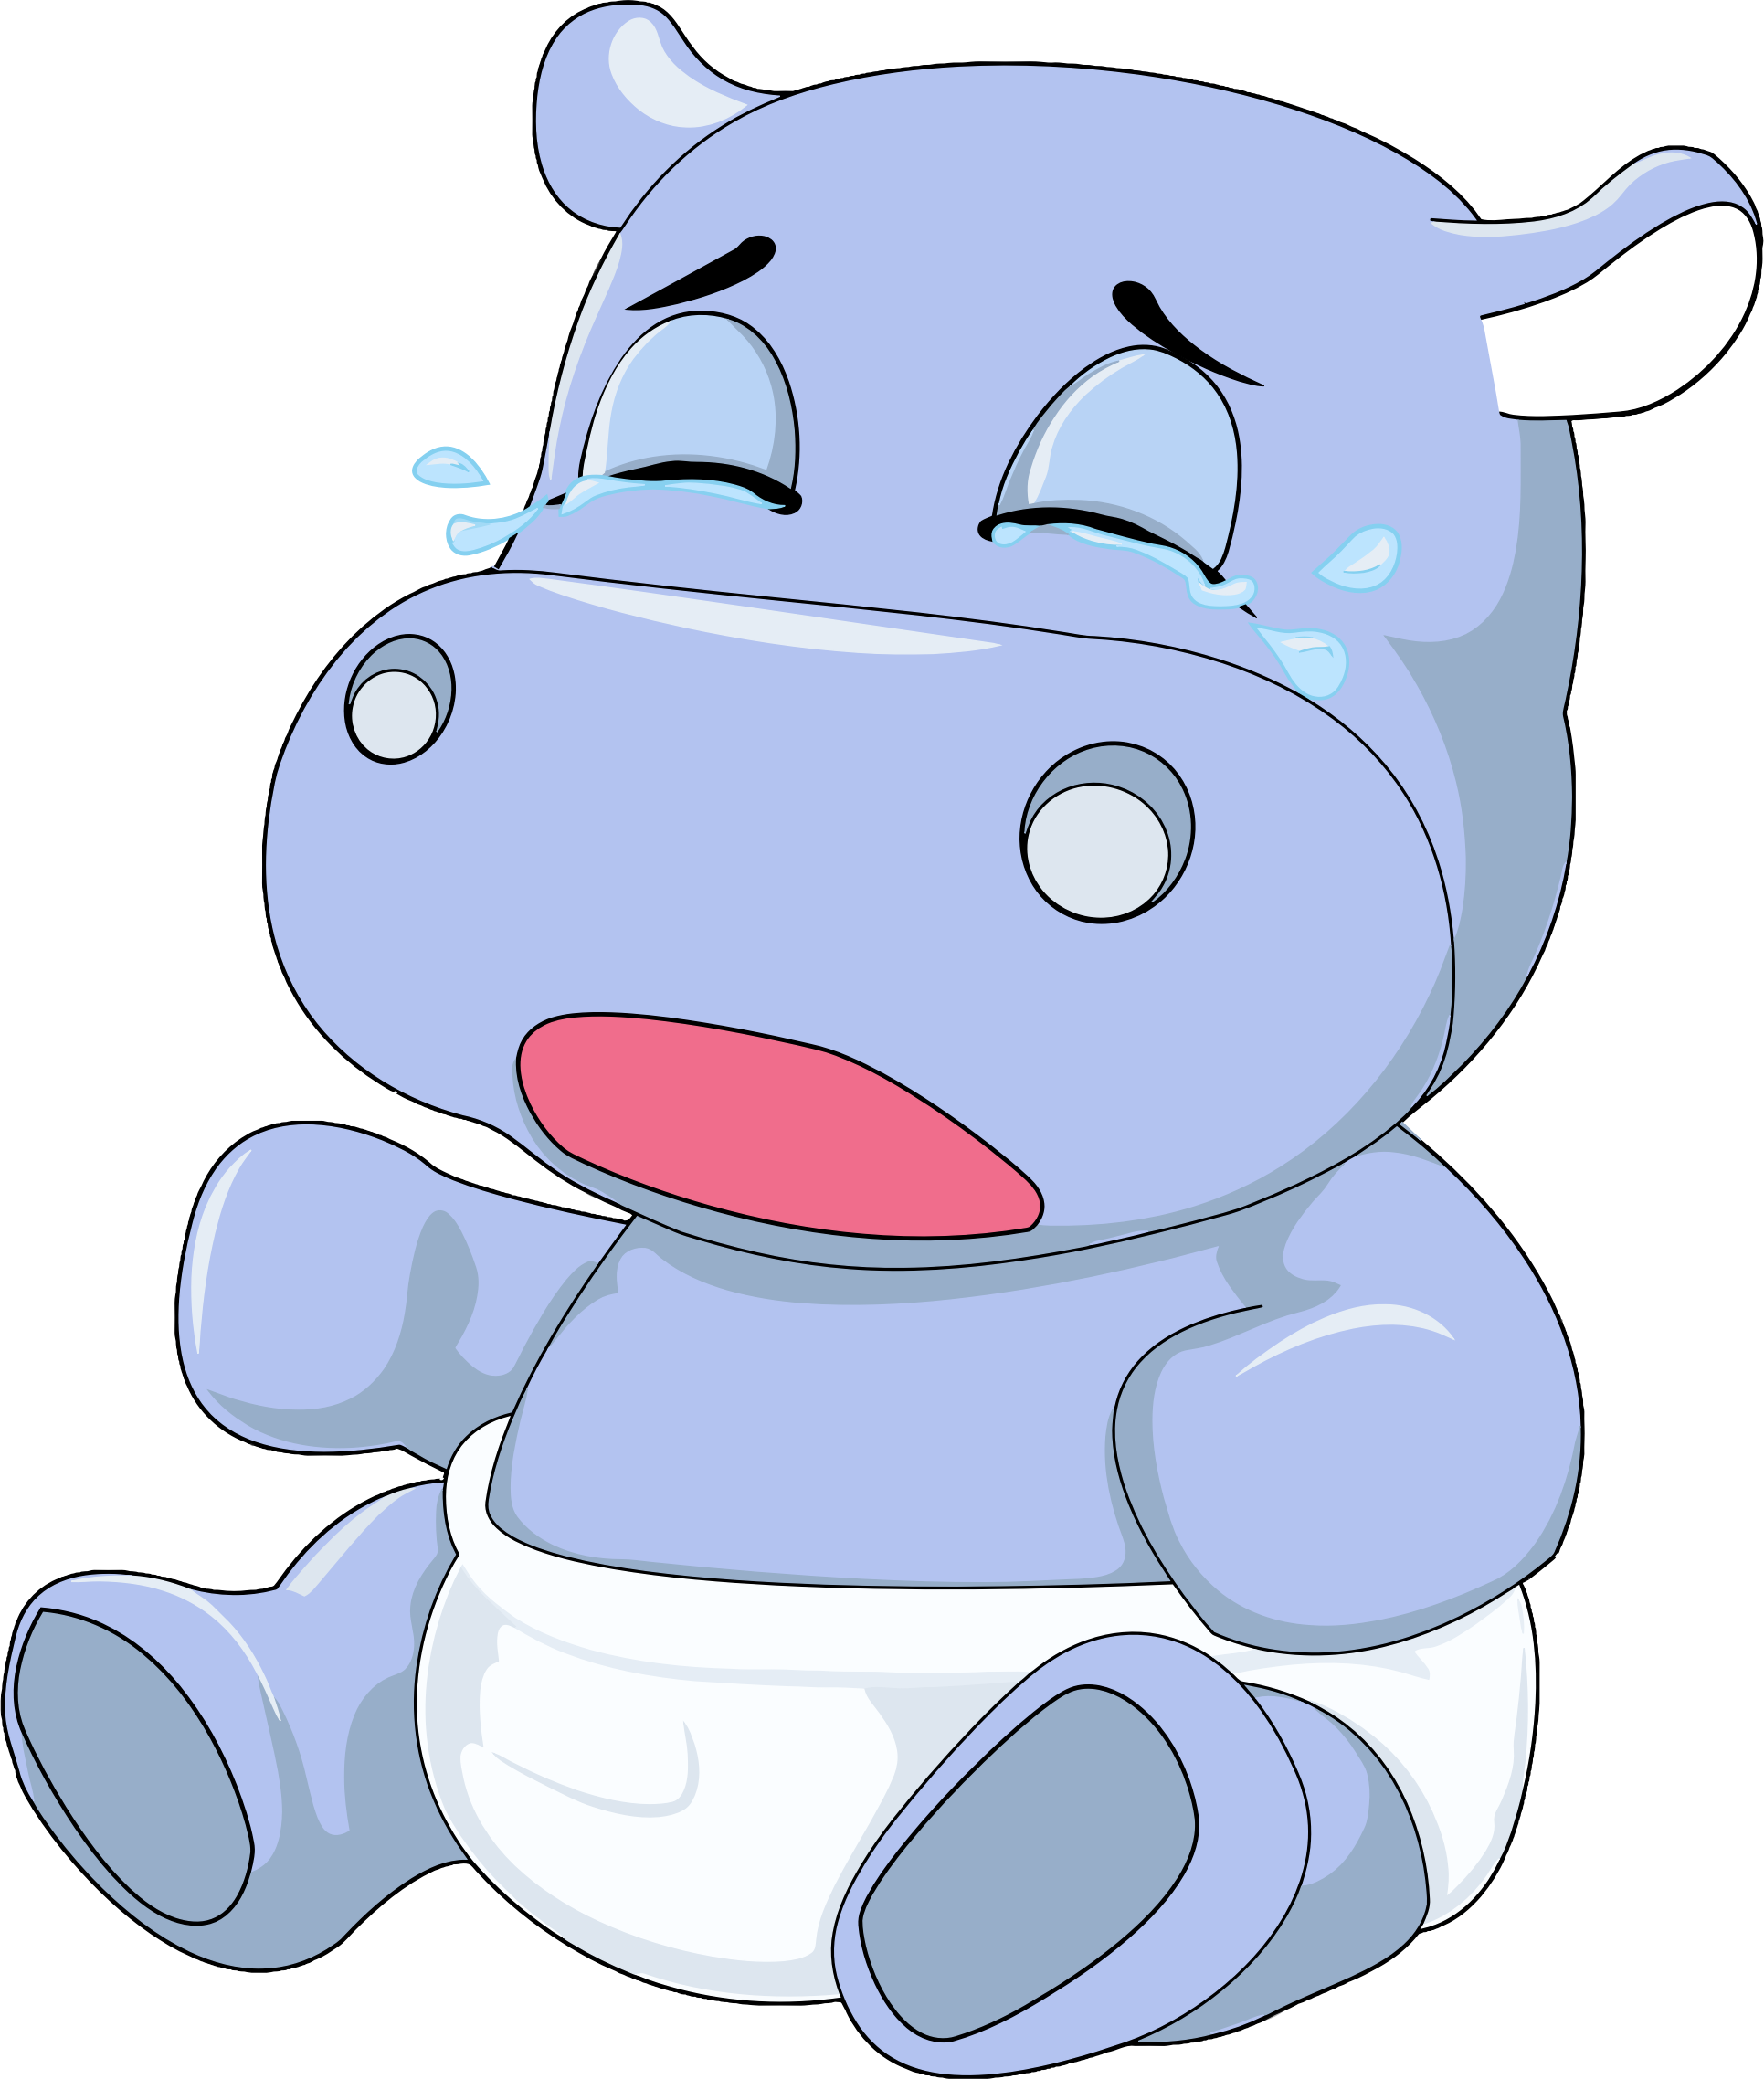 Infant clipart baby cry. Hippo crying big image